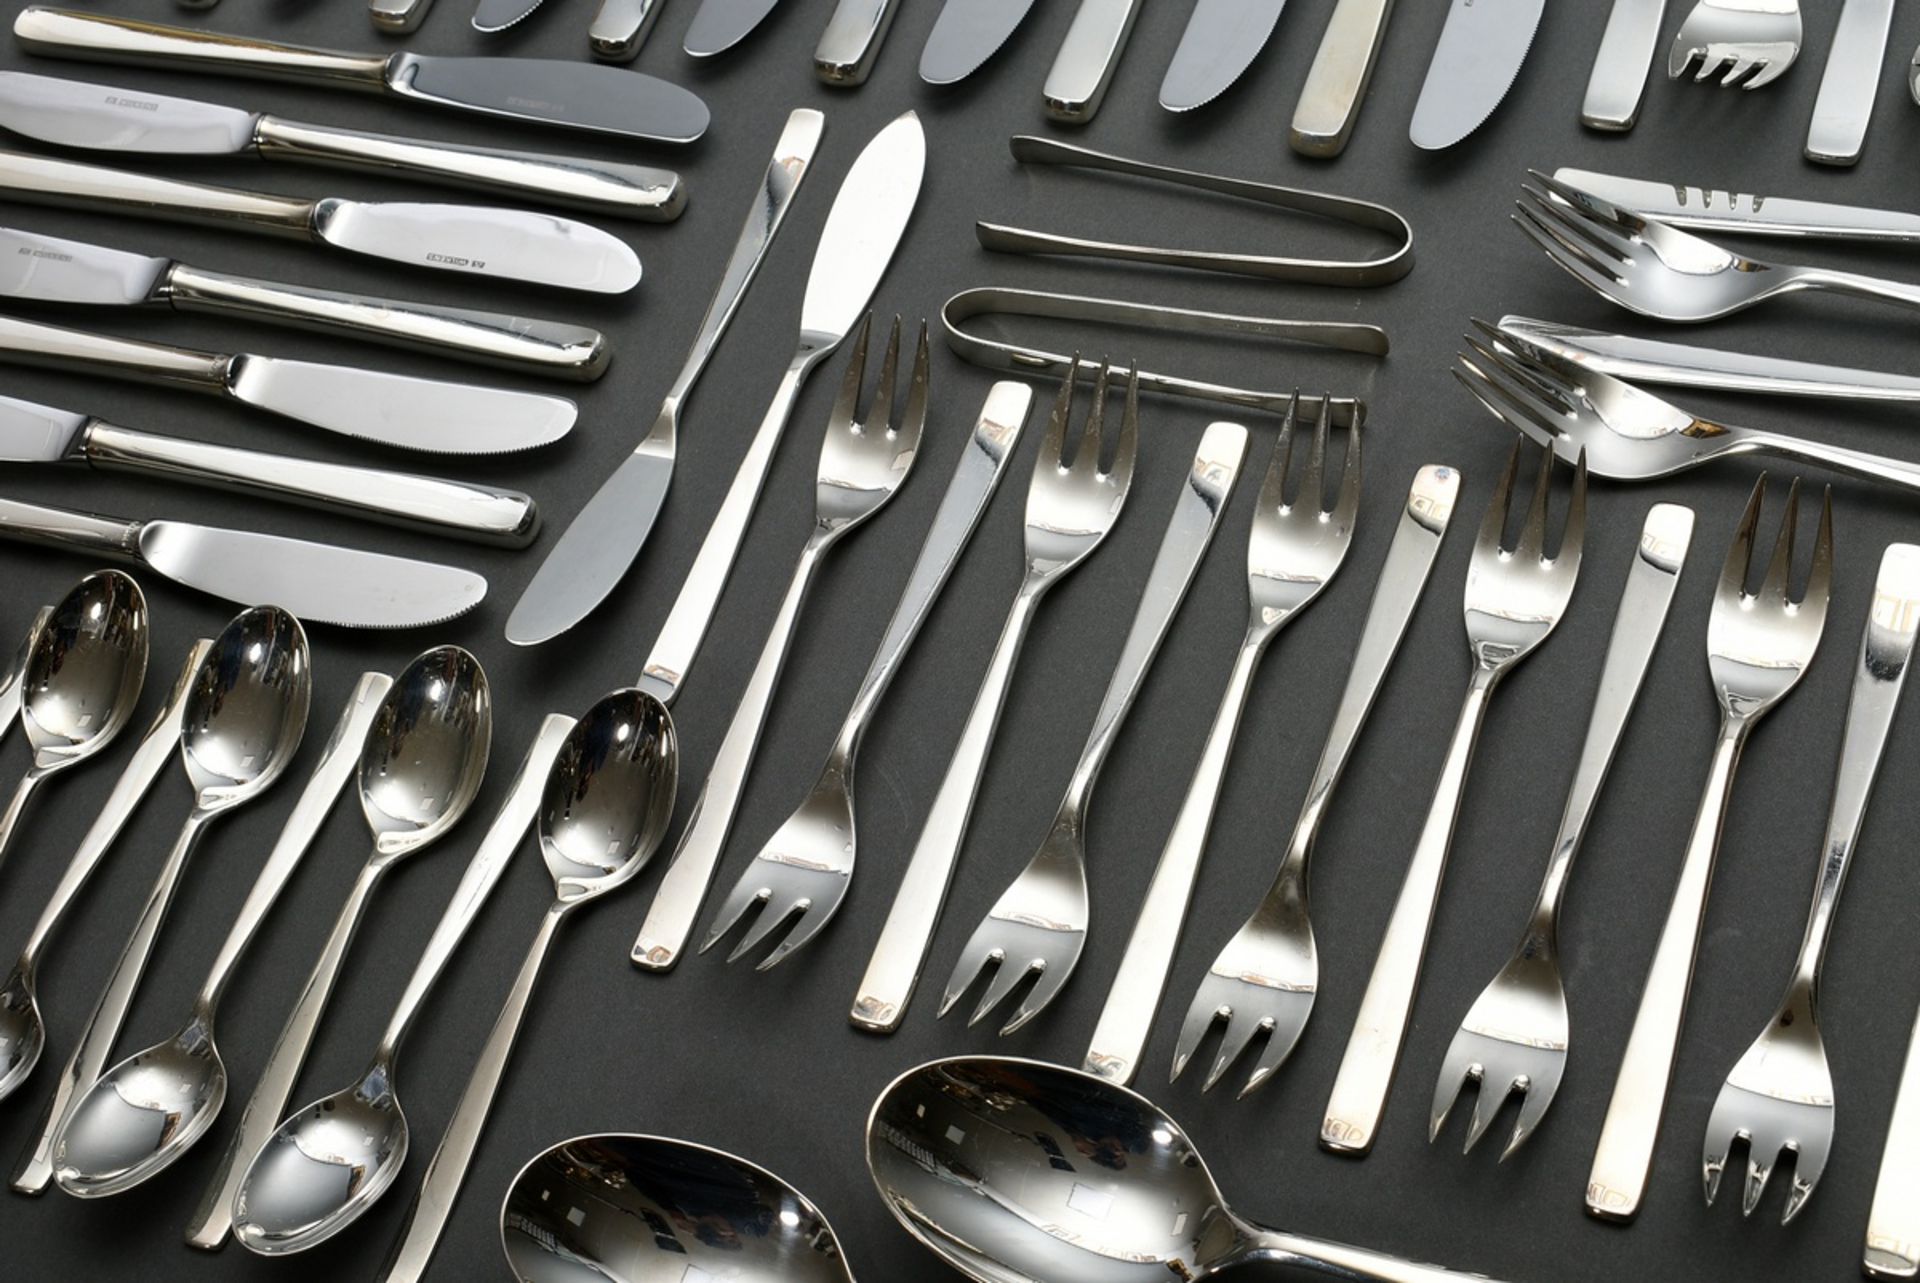 83 pieces Wilkens cutlery ‘Modern’, silver 800, 2361g (without knives), consisting of: 13 table kni - Image 6 of 7